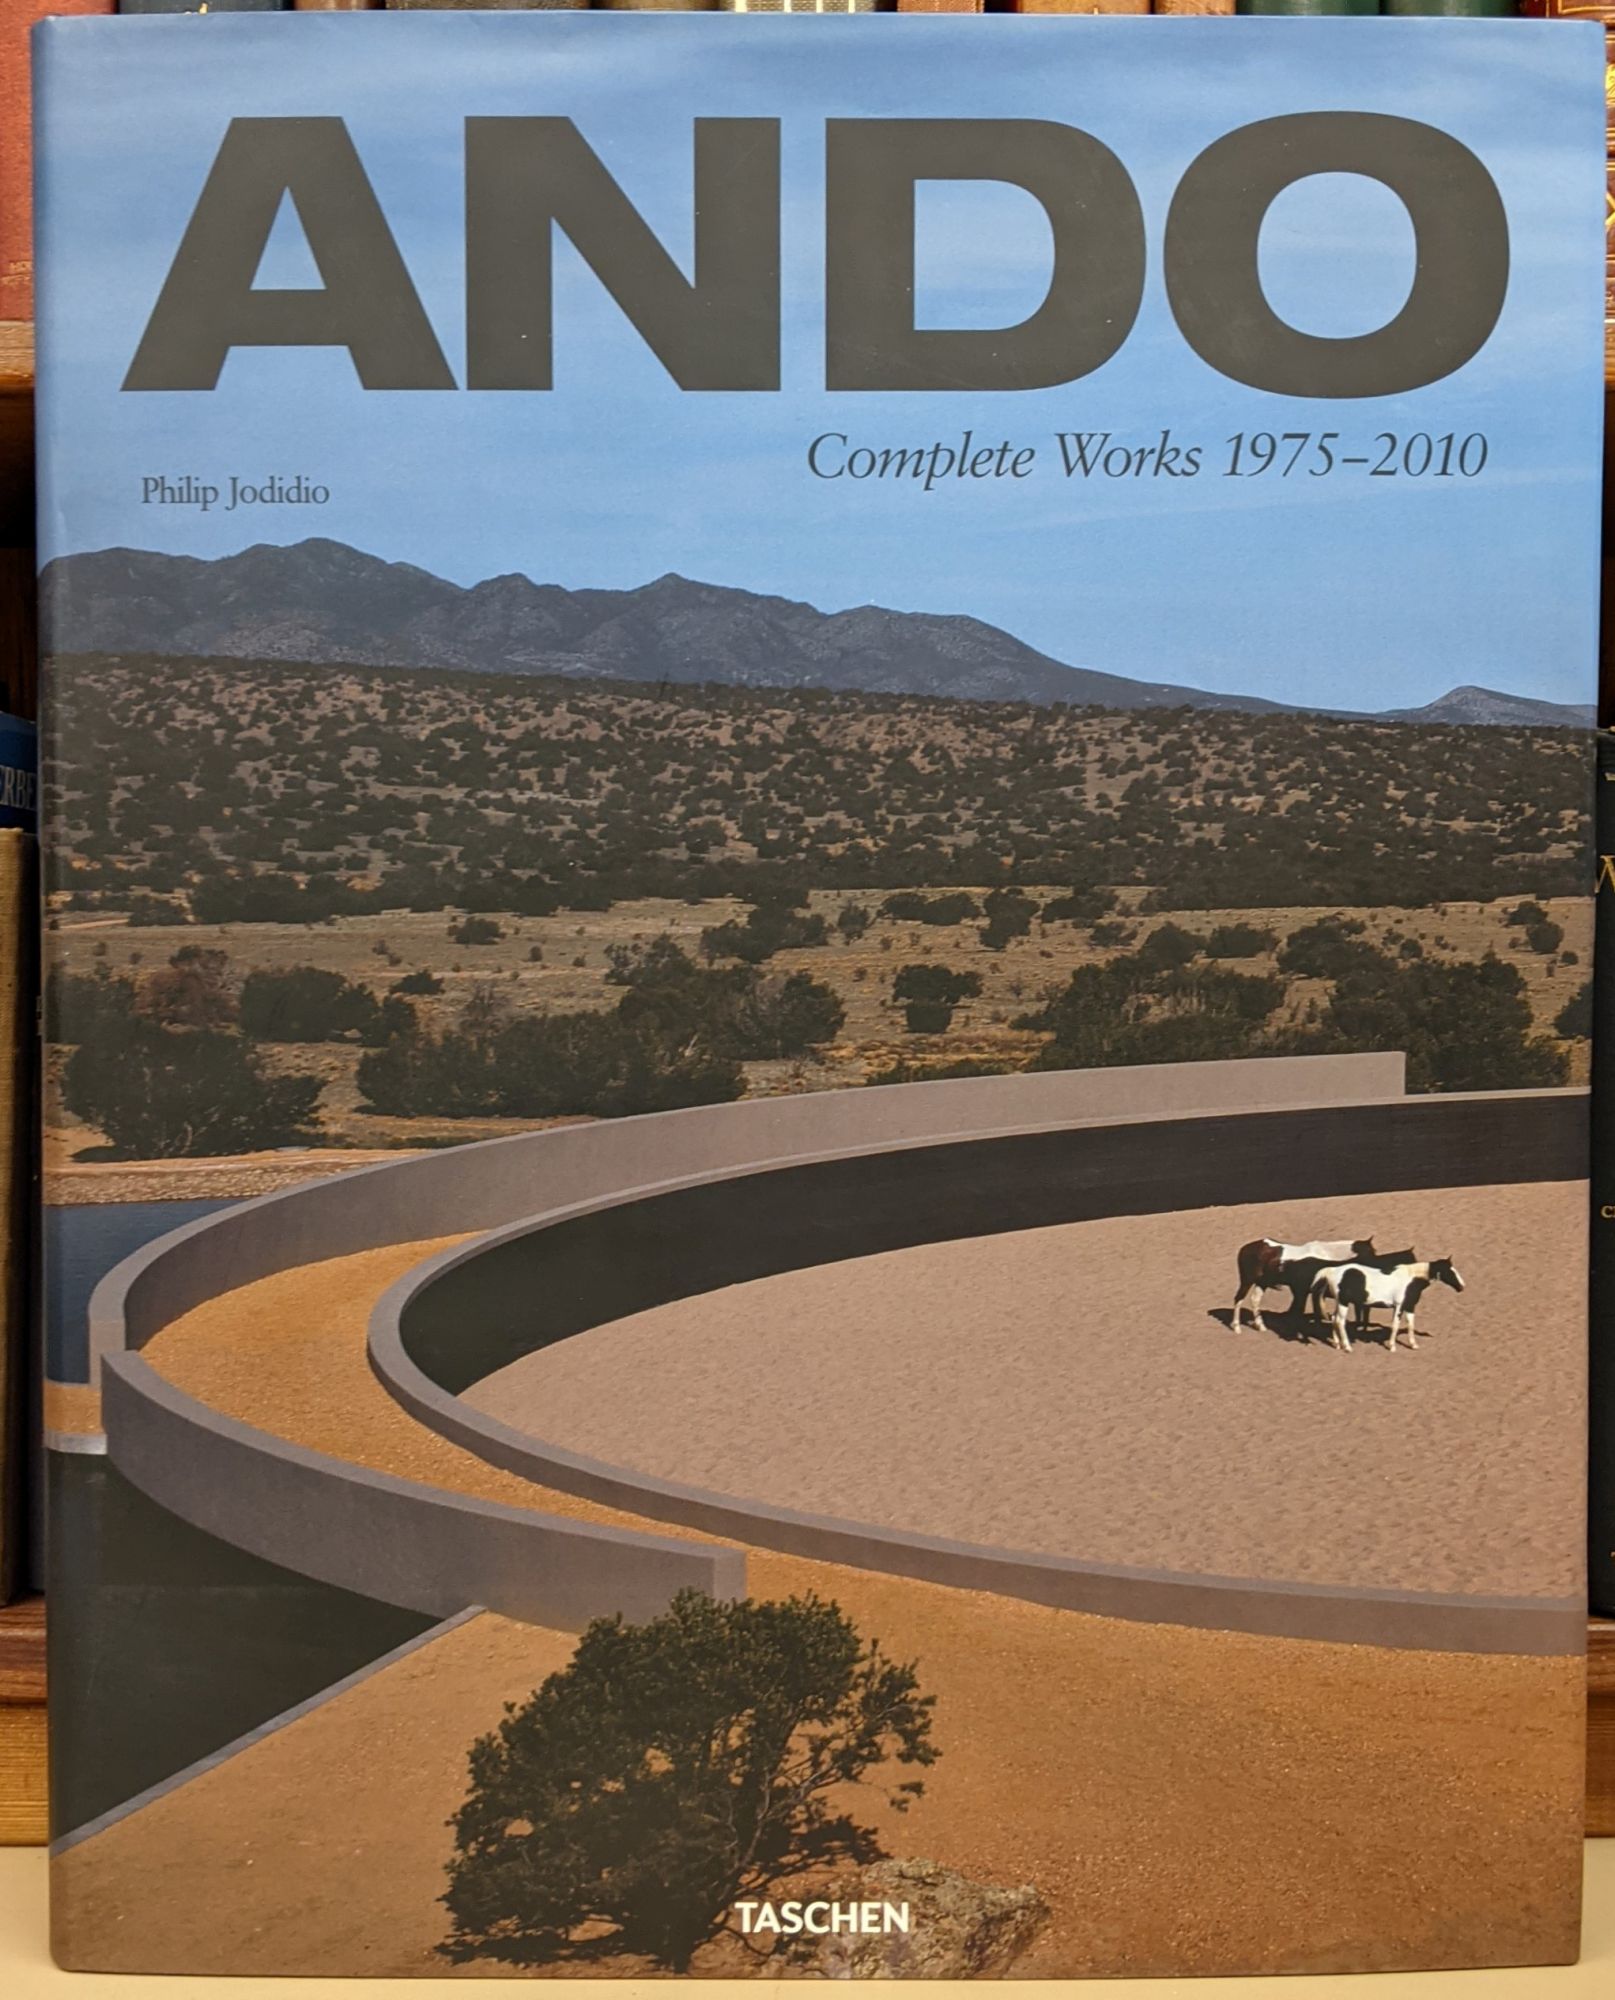 Ando: Complete Works 1975-2010 by Philip Jodidio on Moe's Books